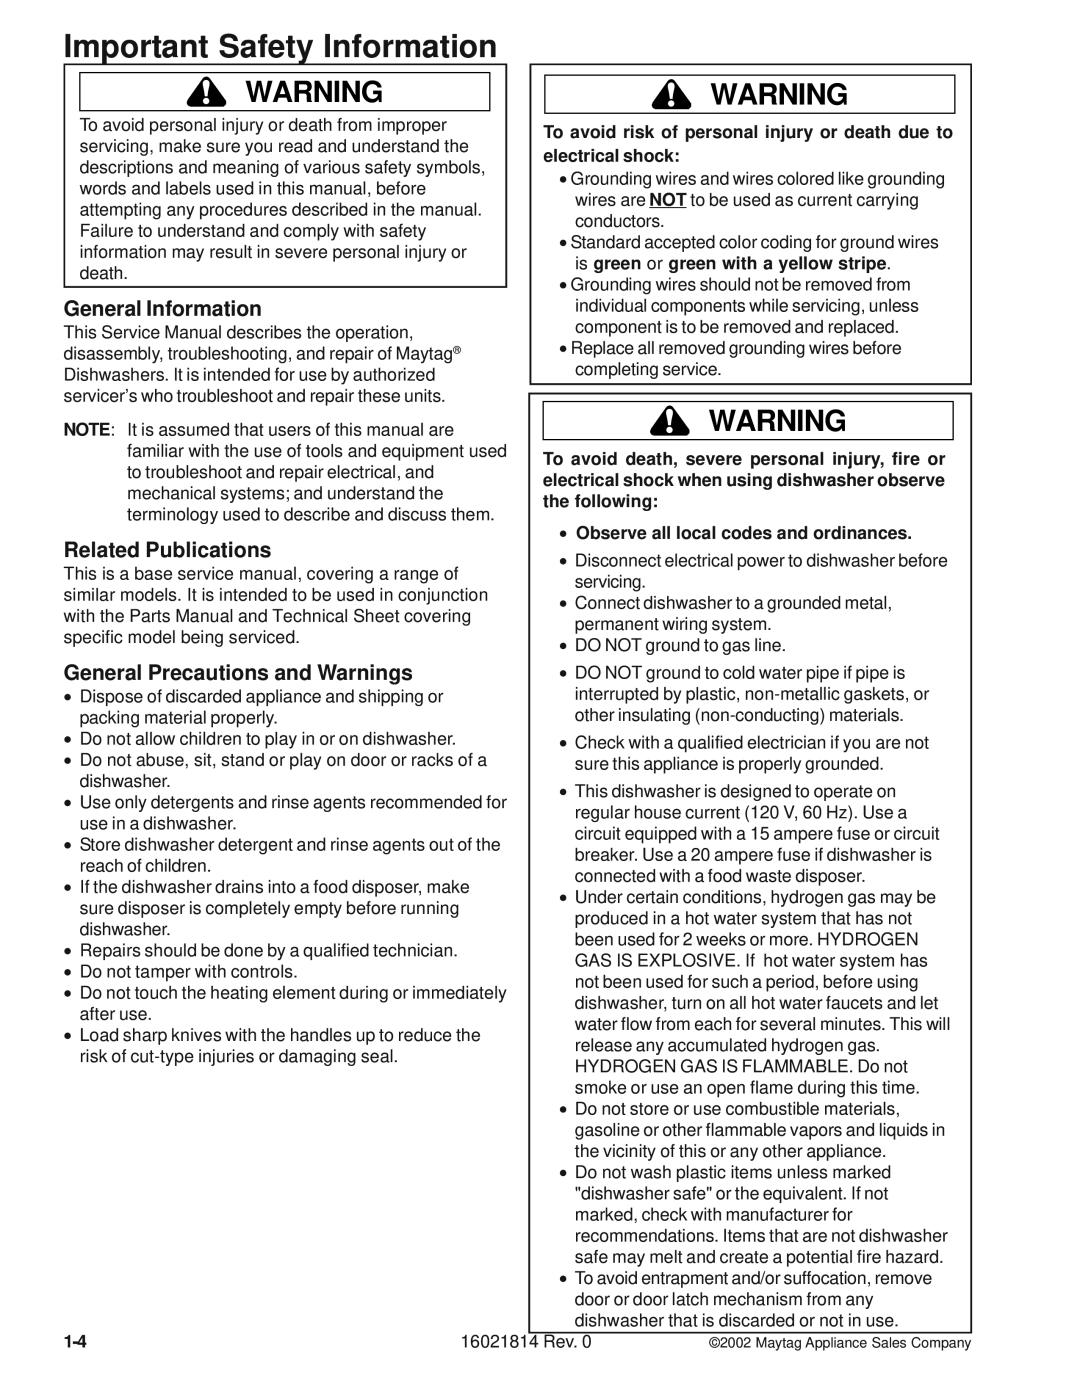 Maytag MDBH970AW Important Safety Information, General Information, Related Publications, General Precautions and Warnings 